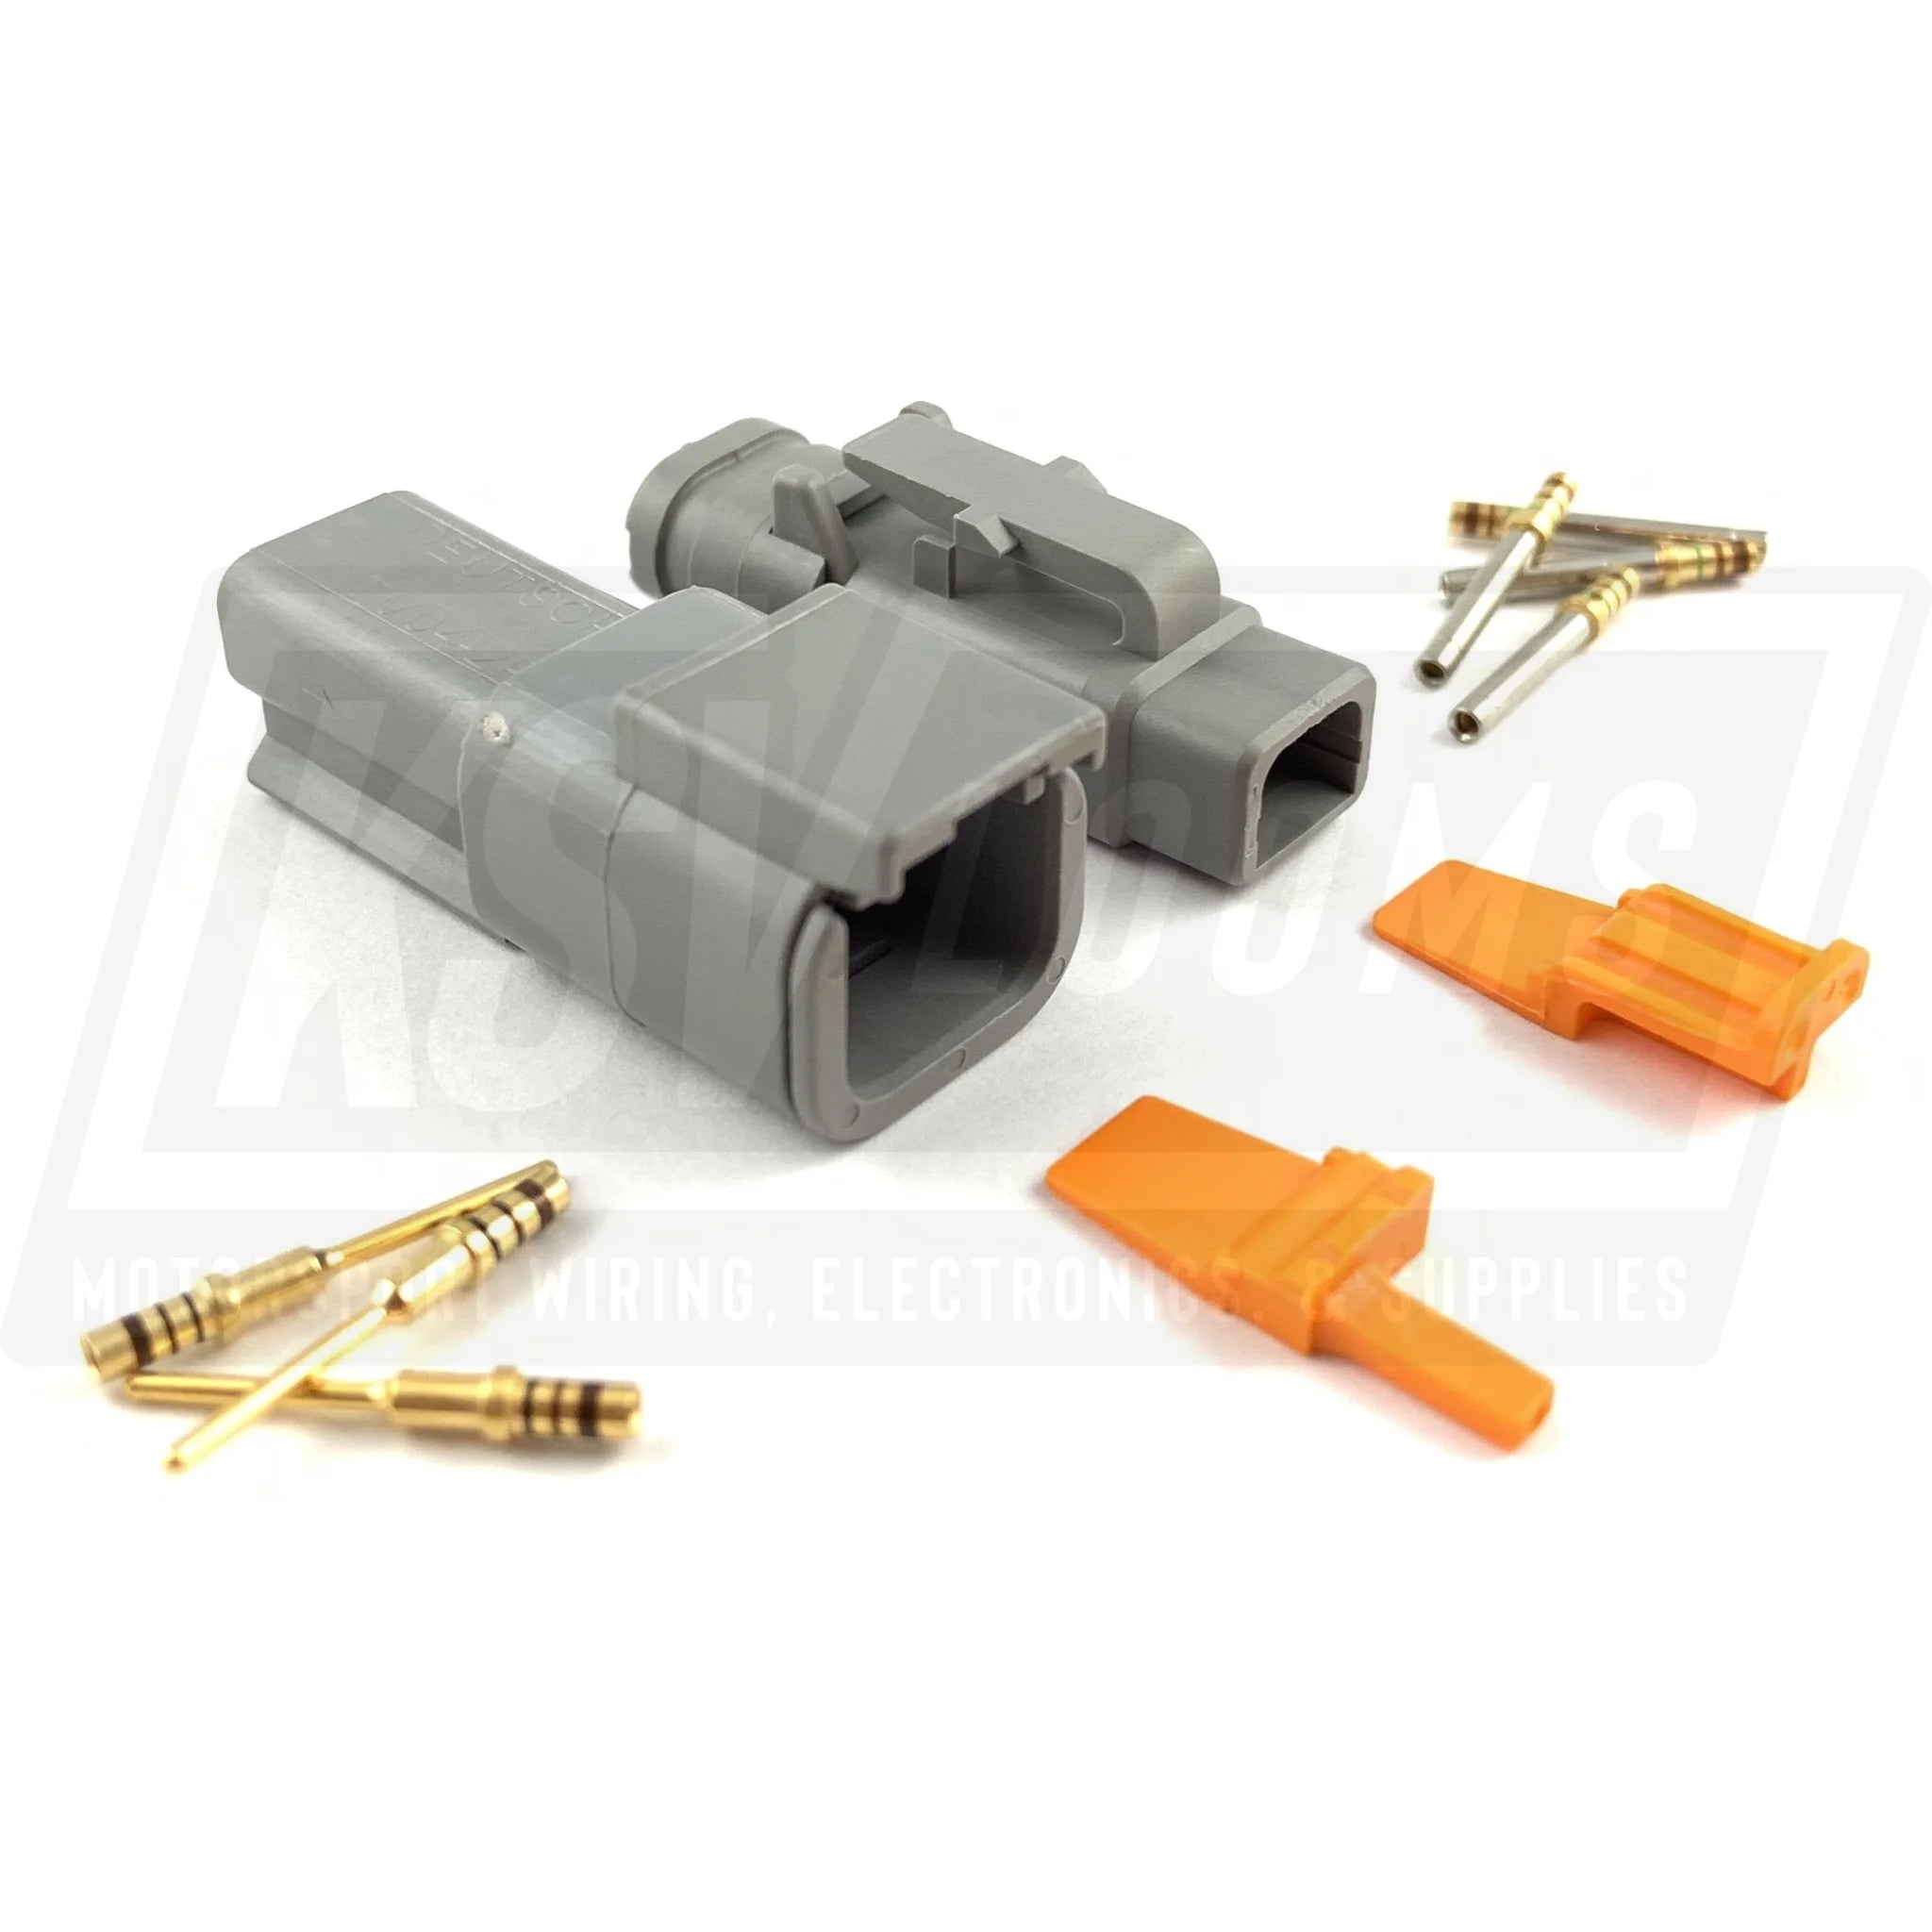 Mated Deutsch Dtm 2-Way Connector Kit (24-20 Awg)